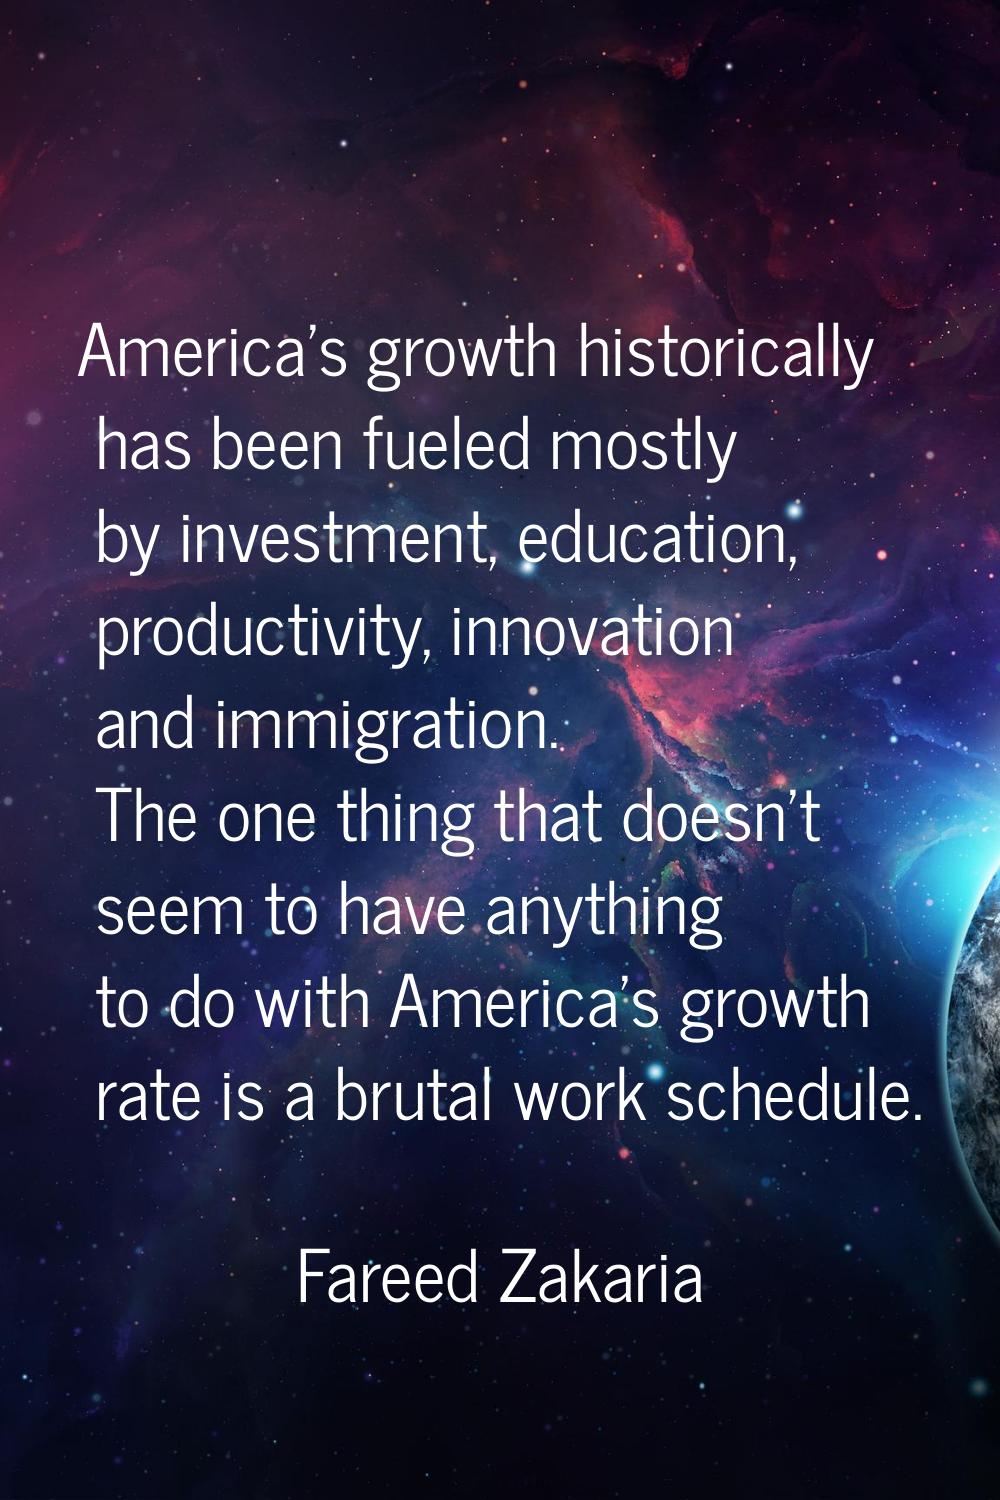 America's growth historically has been fueled mostly by investment, education, productivity, innova